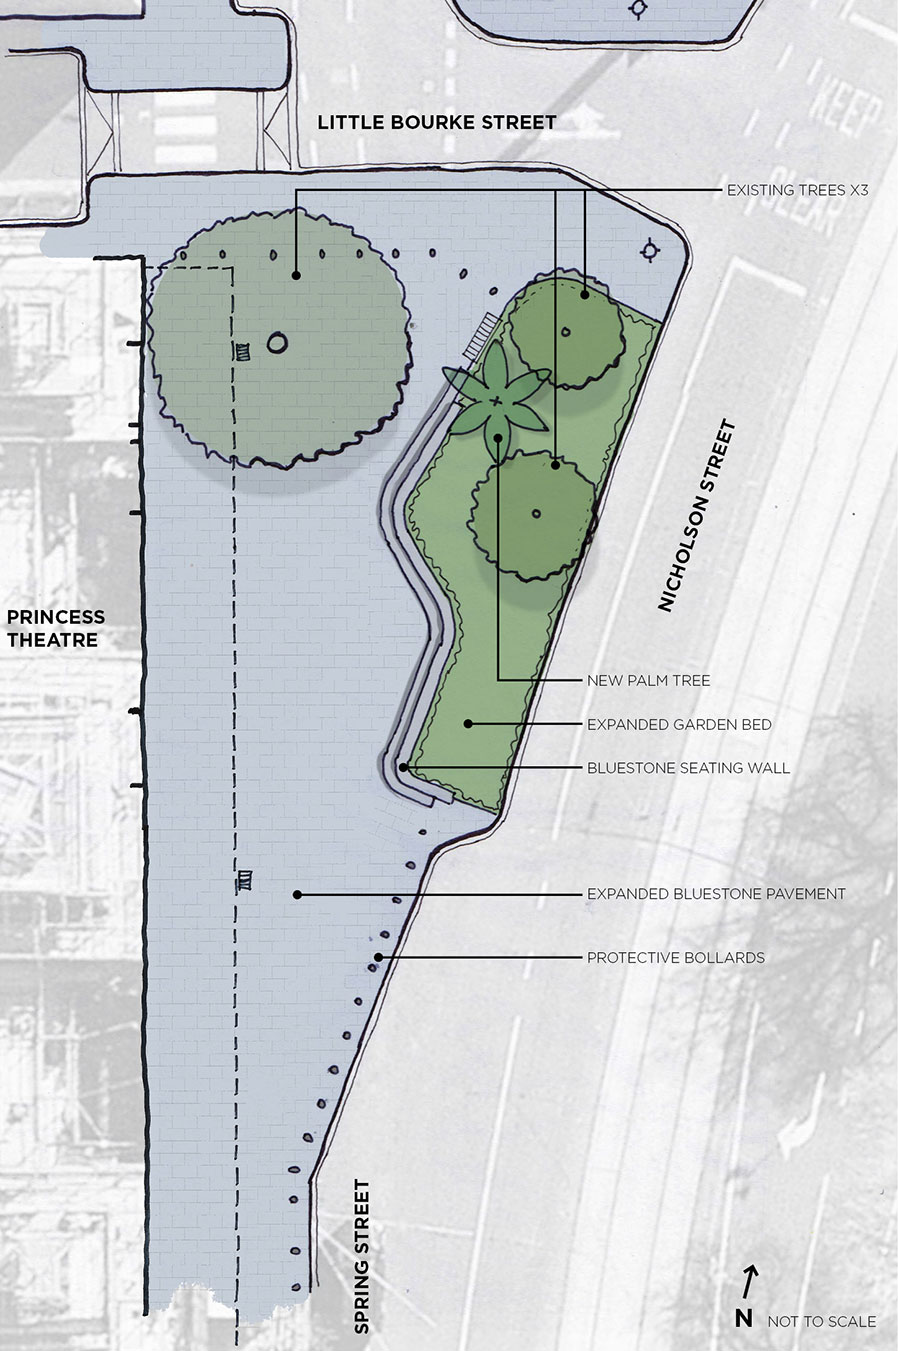 Concept plan of the proposed changes. Along the north east along Nicholson Street there is an expanded garden bed with a bluestone seating wall, with a new palm tree among the three existing trees. The bluestone pavement area in front of the theatre is expanded and protective bollards have been added.